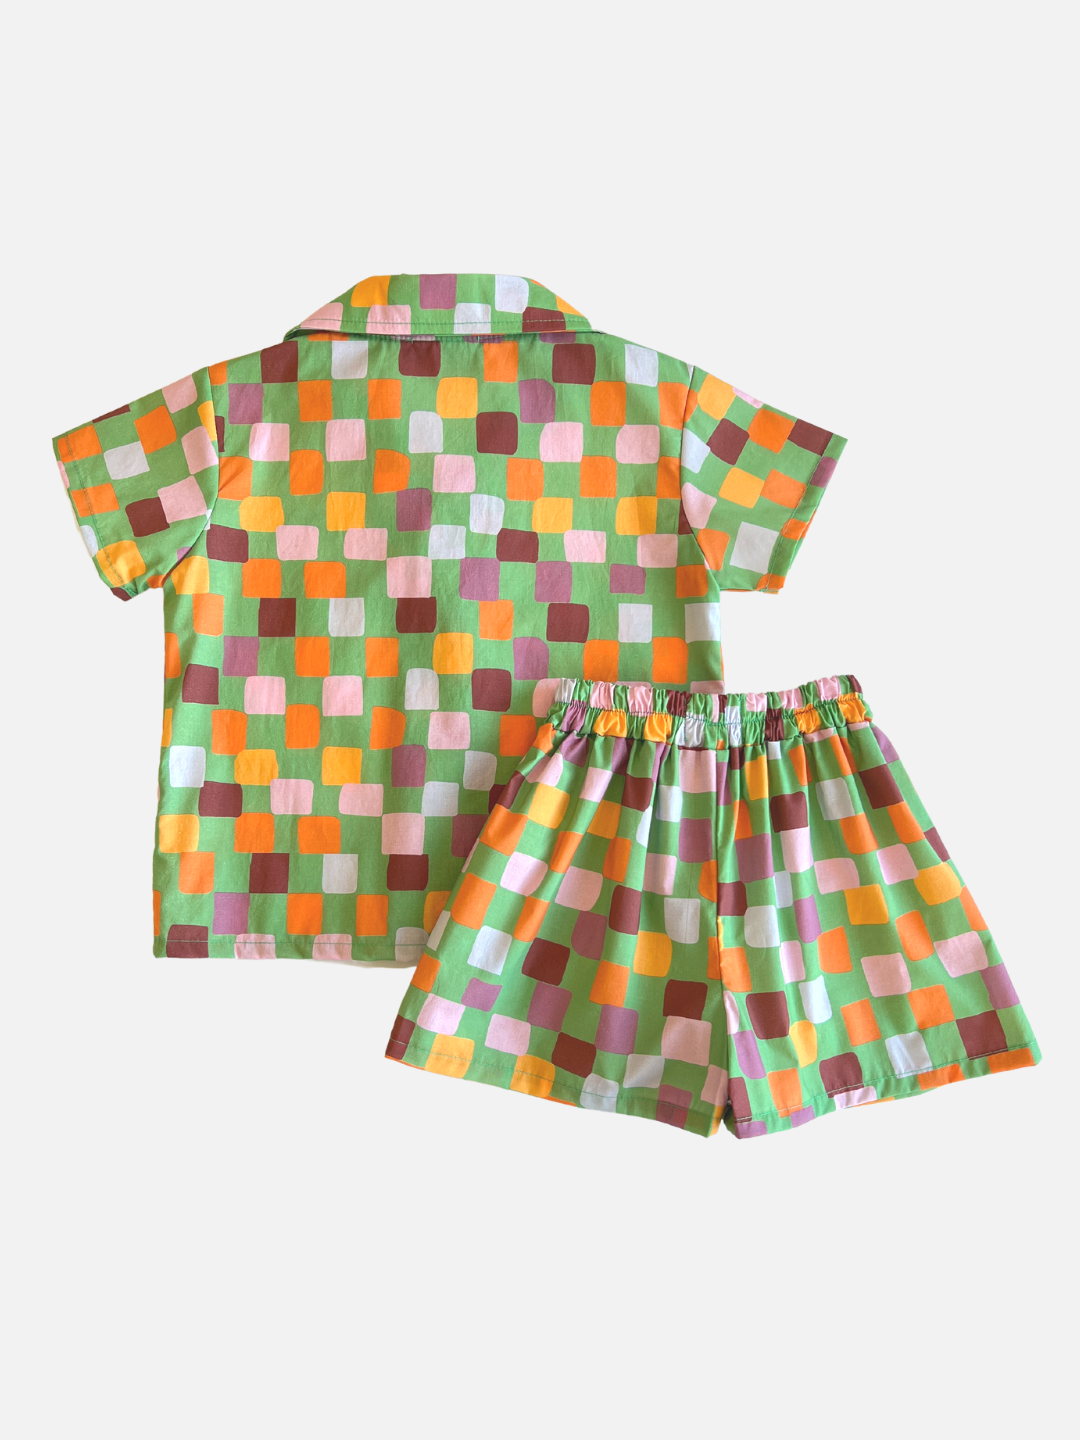 A kids' shirt and shorts set in a pattern of purple, pink, gold and orange squares on a green background, back view